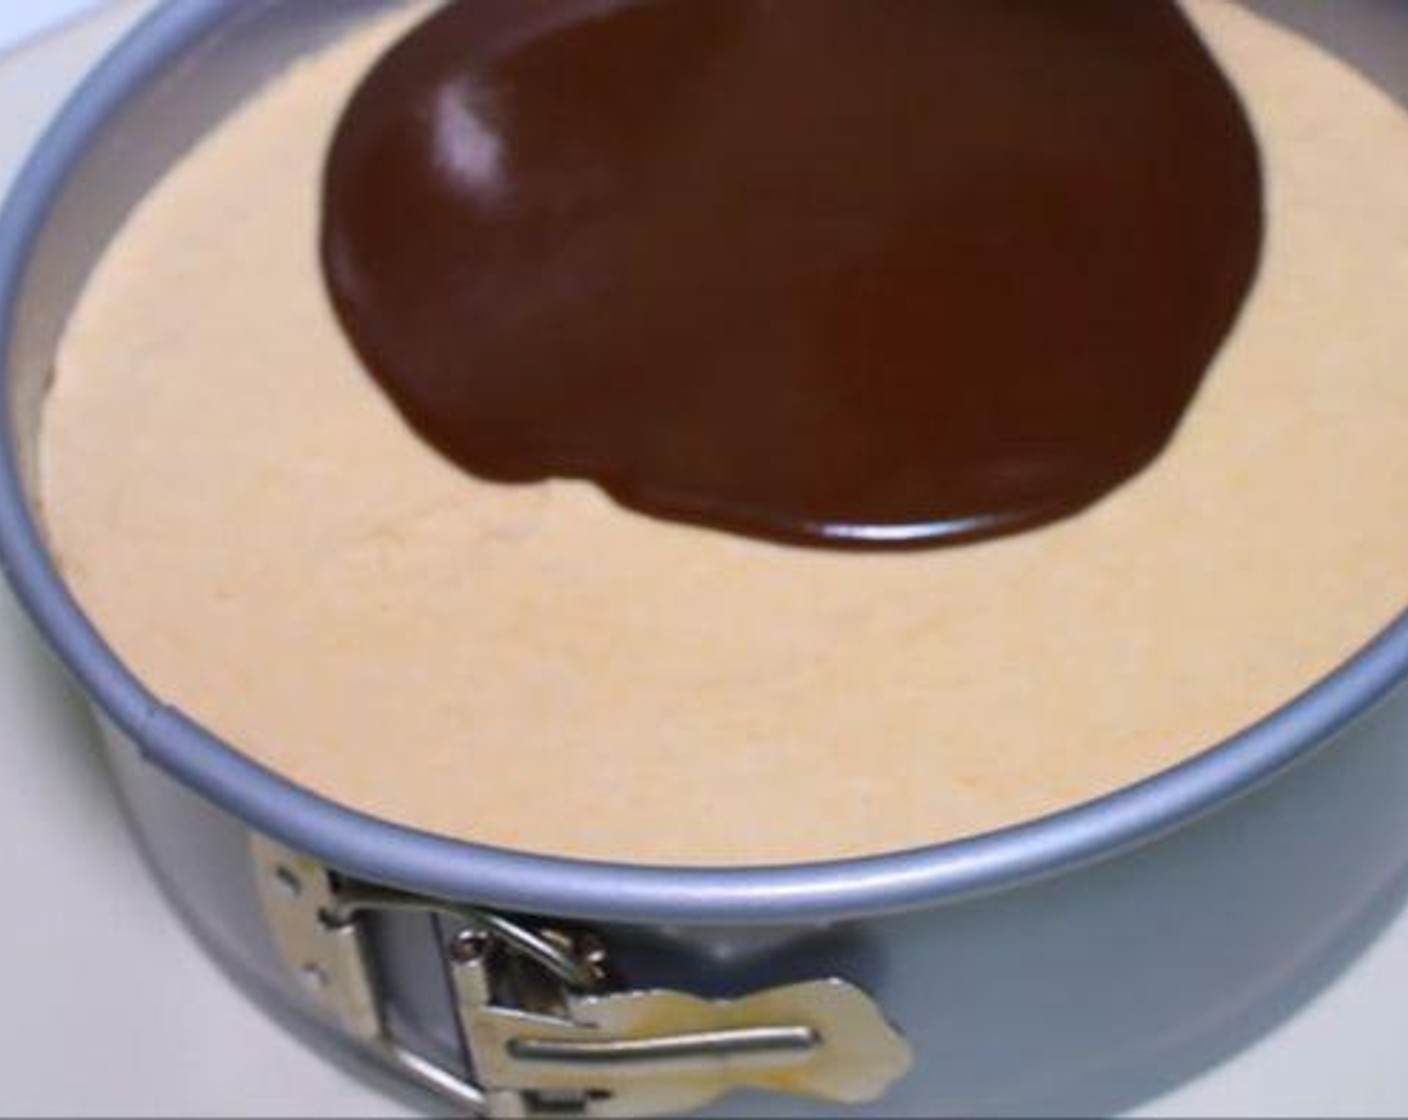 step 5 To make the ganache, heat the Heavy Cream (4 fl oz). Add the Semi-Sweet Chocolate Chips (2/3 cup) to the cream and mix until combined. Pour the ganache over the chilled cheesecake. Use a spatula to spread it evenly. Cool if desired.